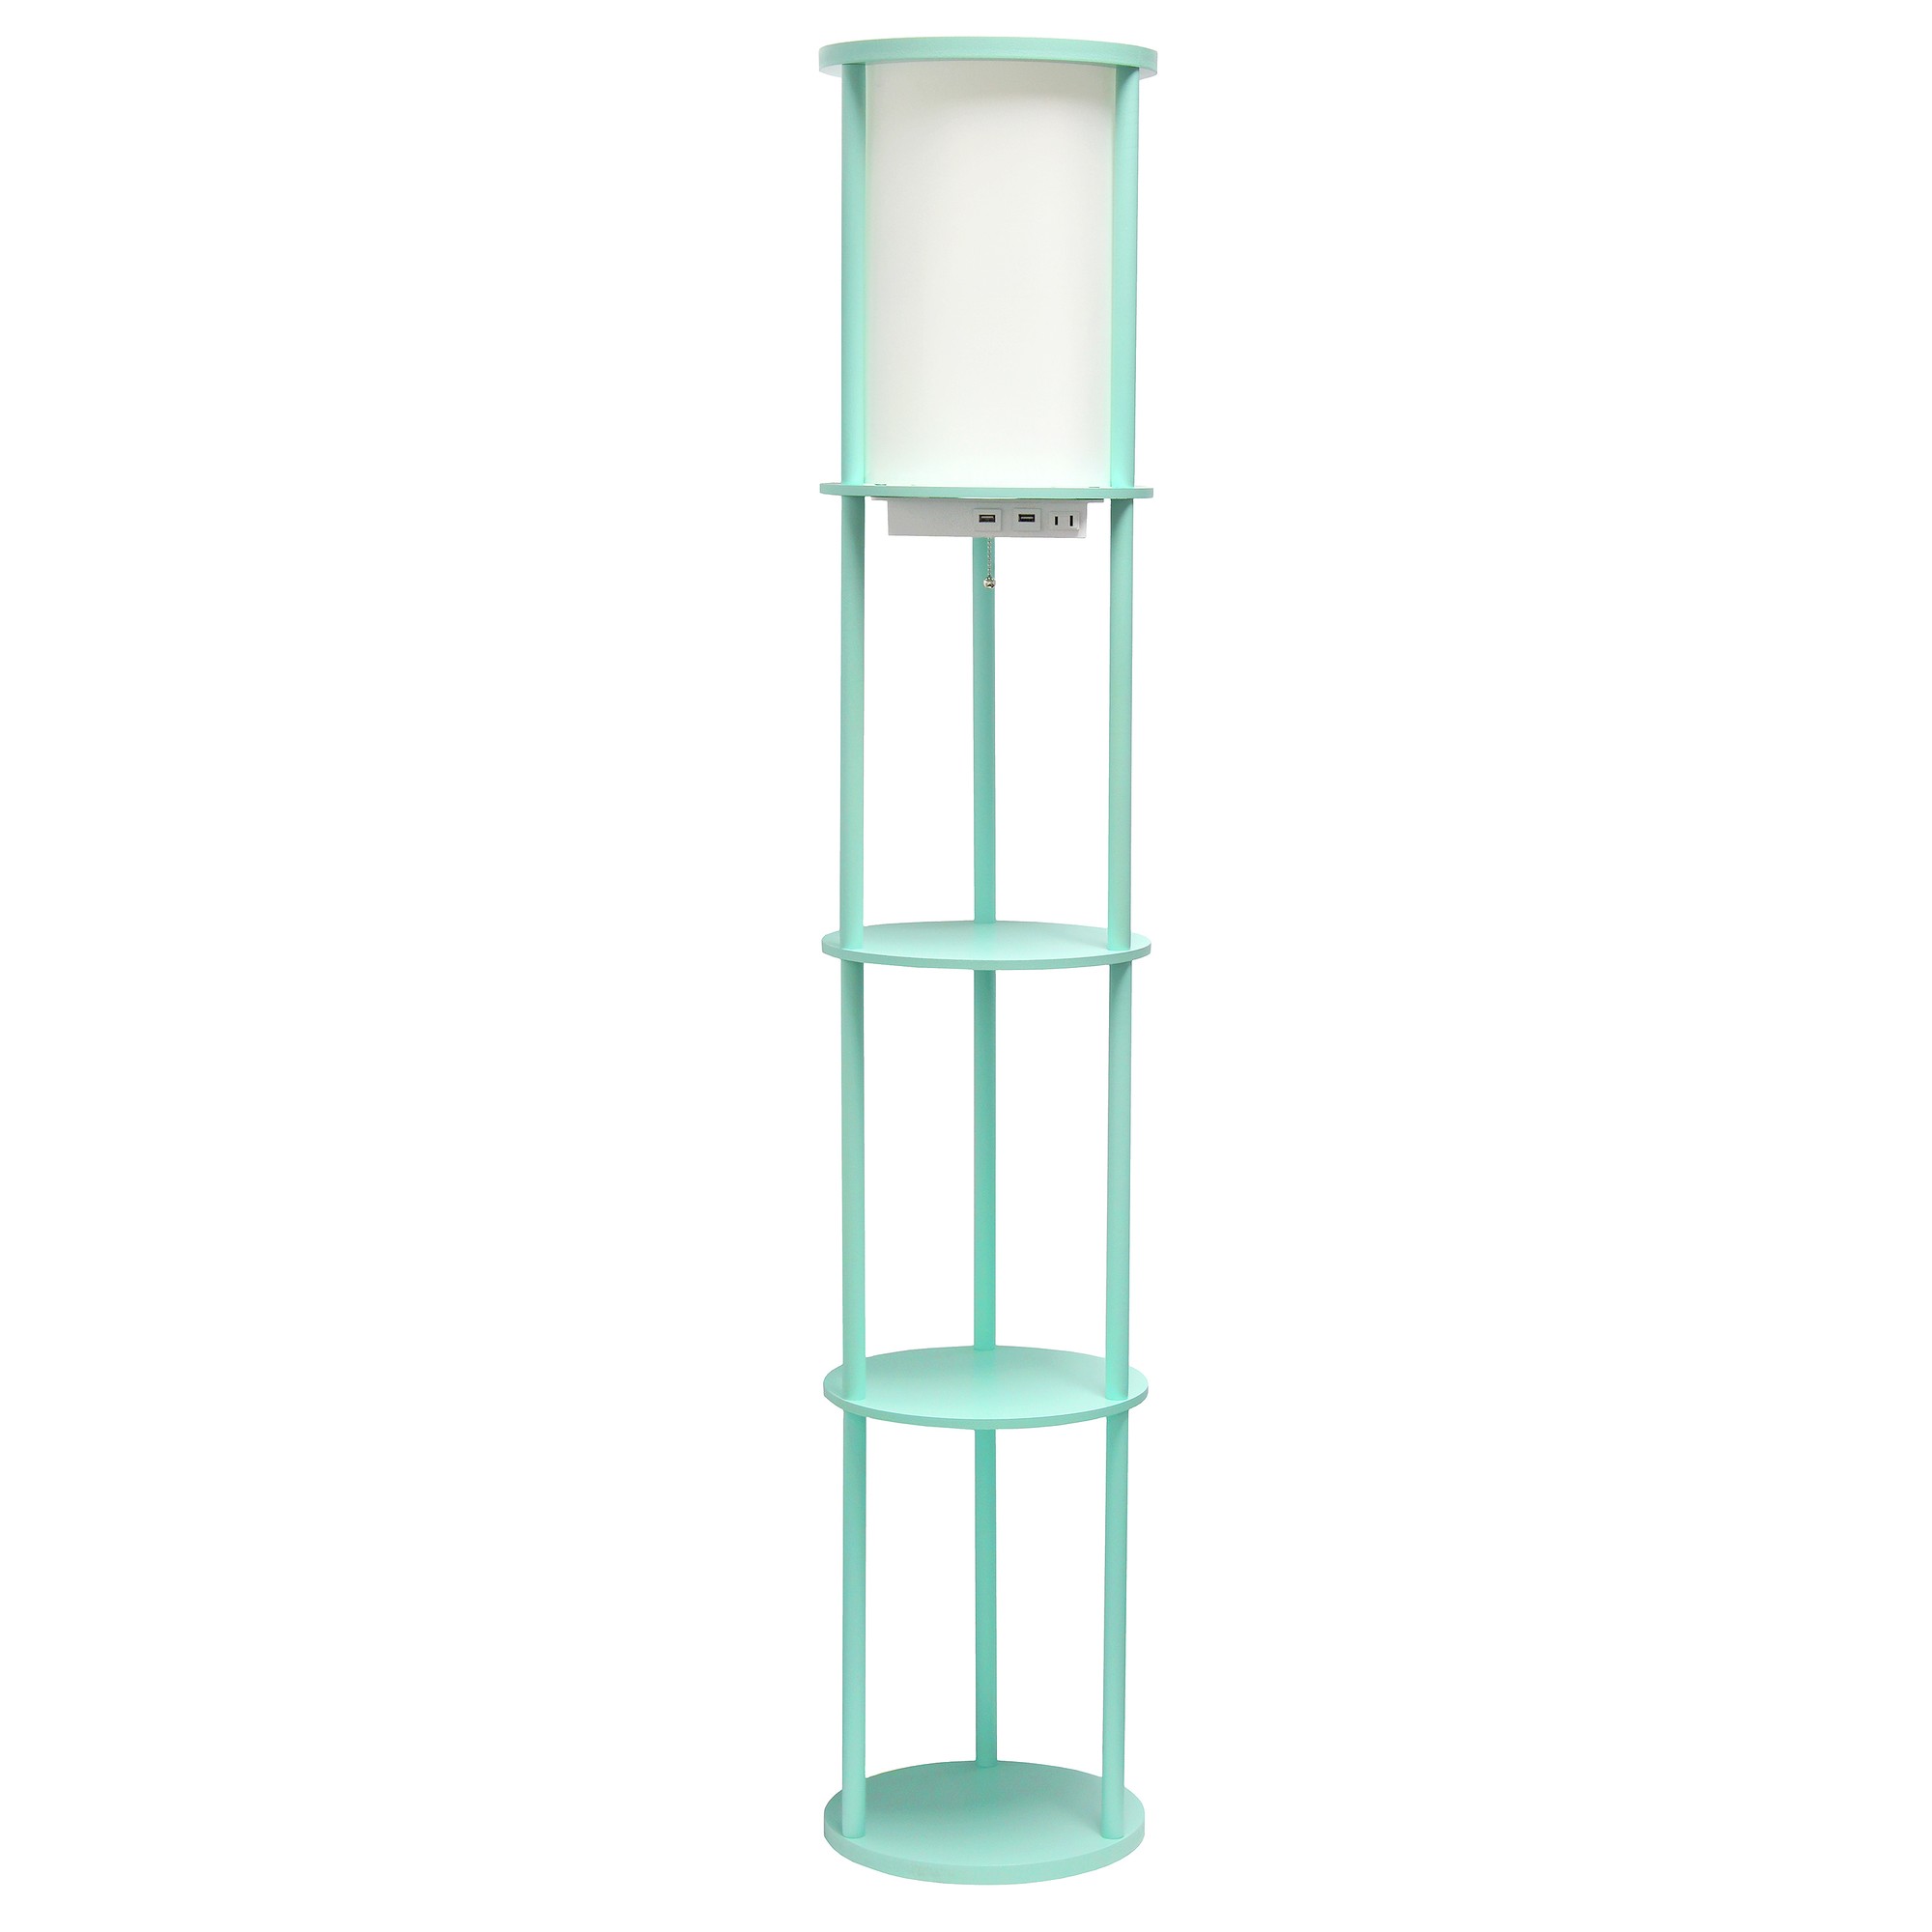 Simple Designs 62.5" Round Storage Floor Lamp with 2 USB Charging Ports, 1 Charging Outlet and Linen Shade, Aqua